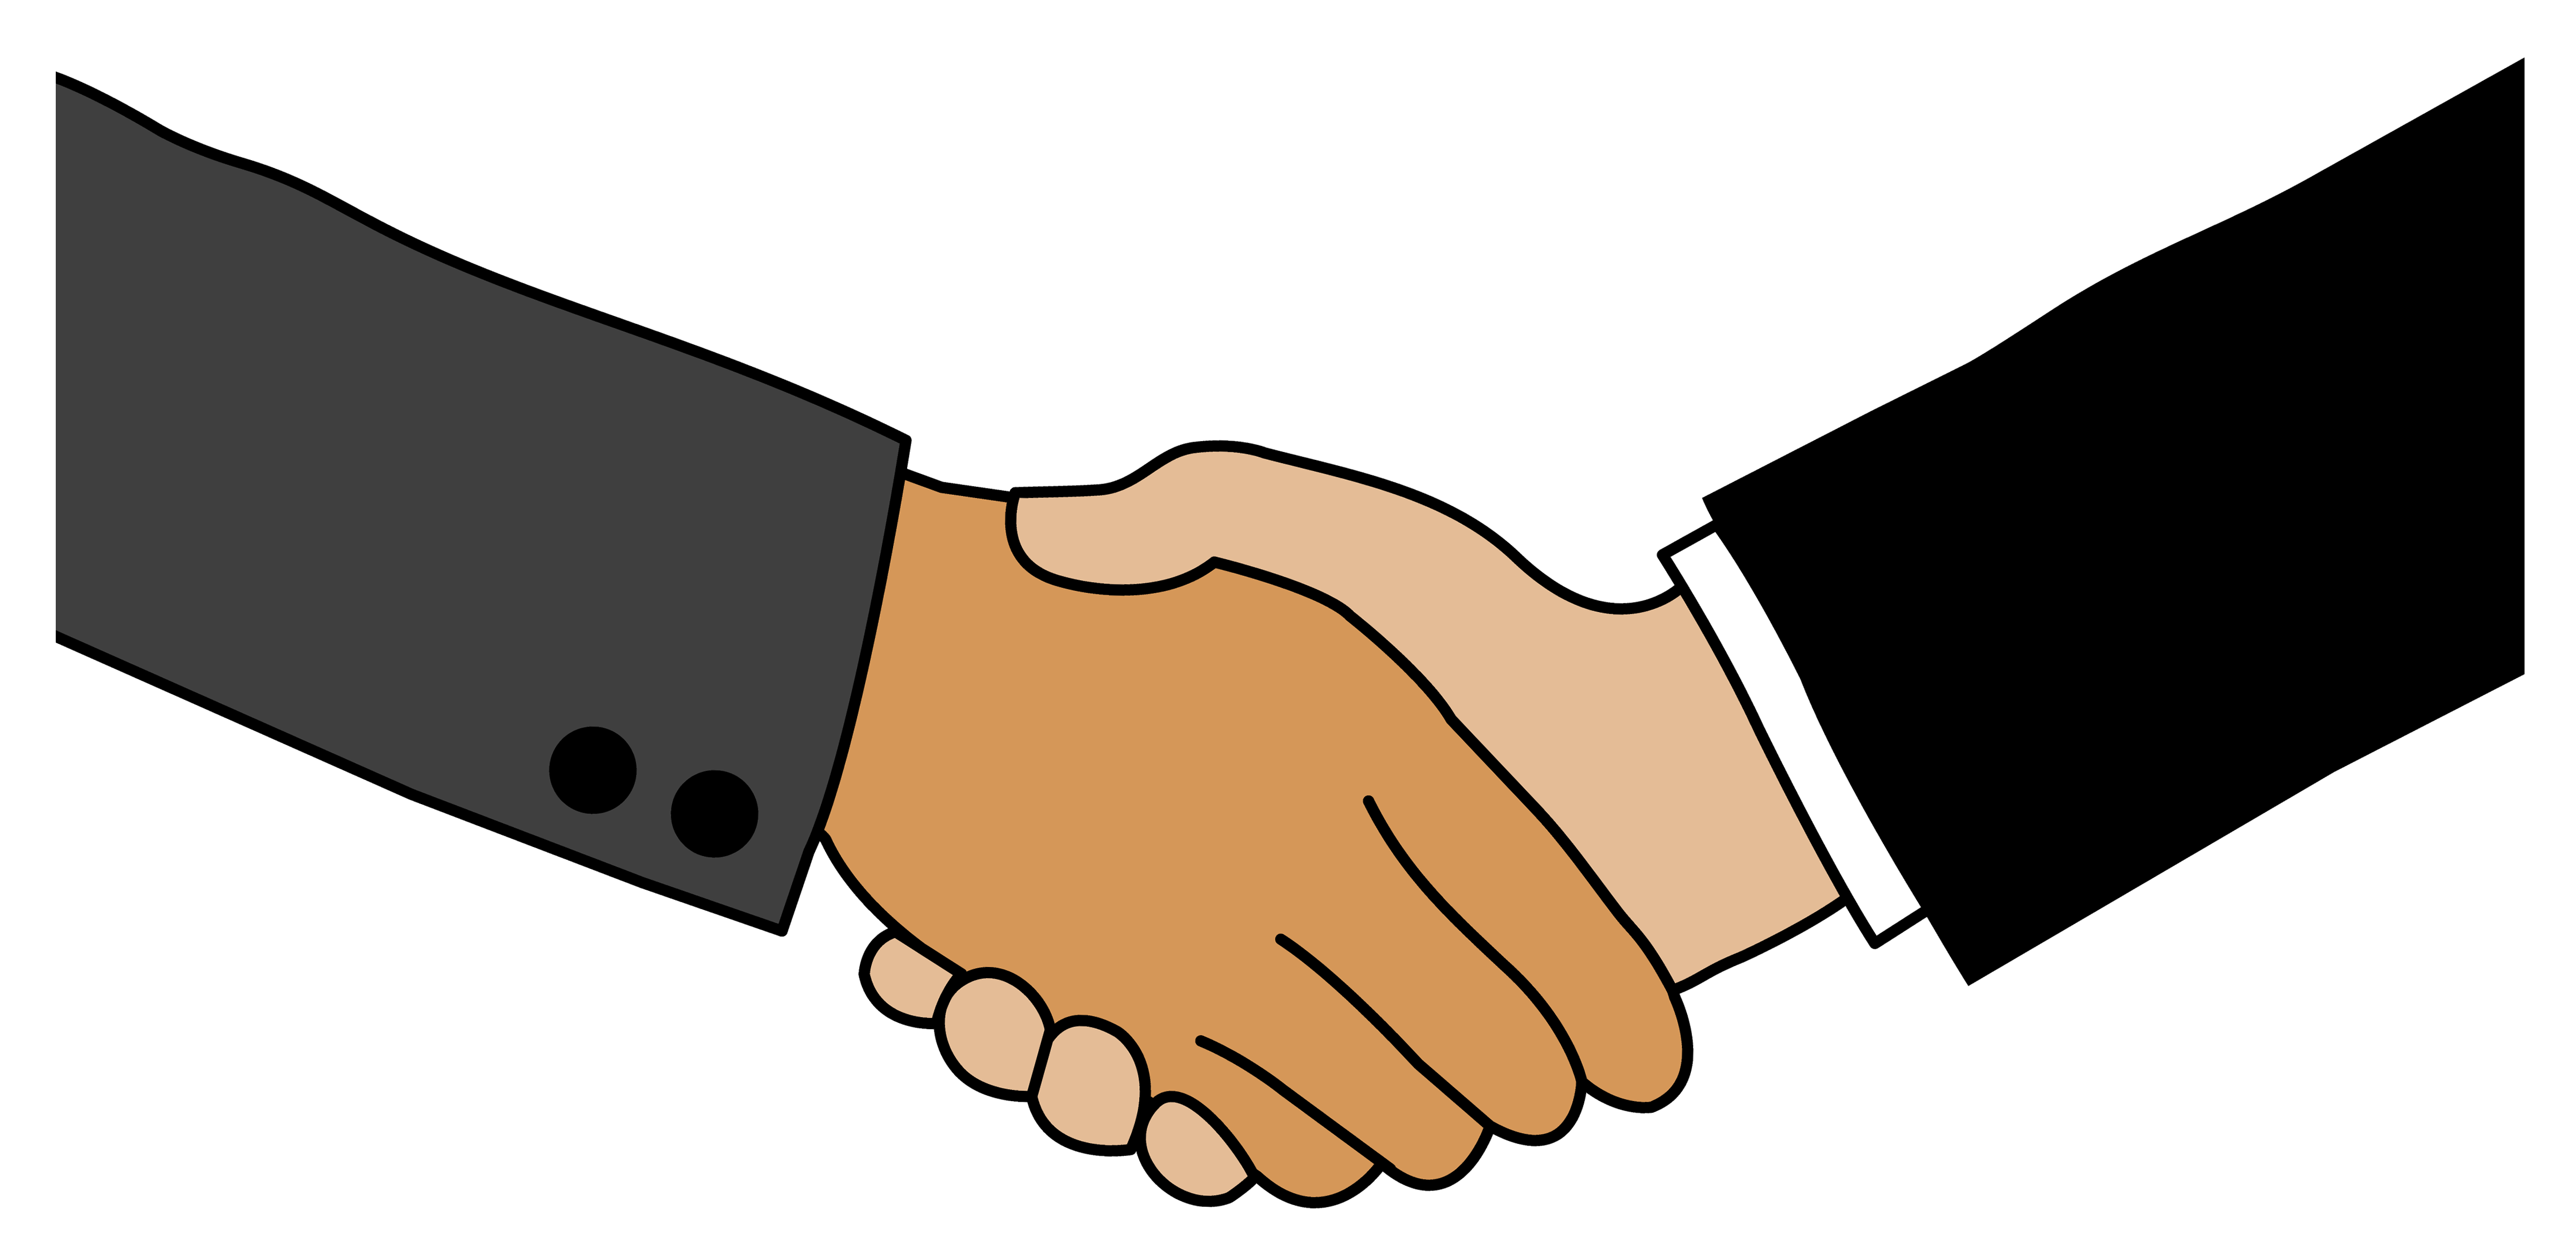 Clipart of people shaking hands - ClipartFox